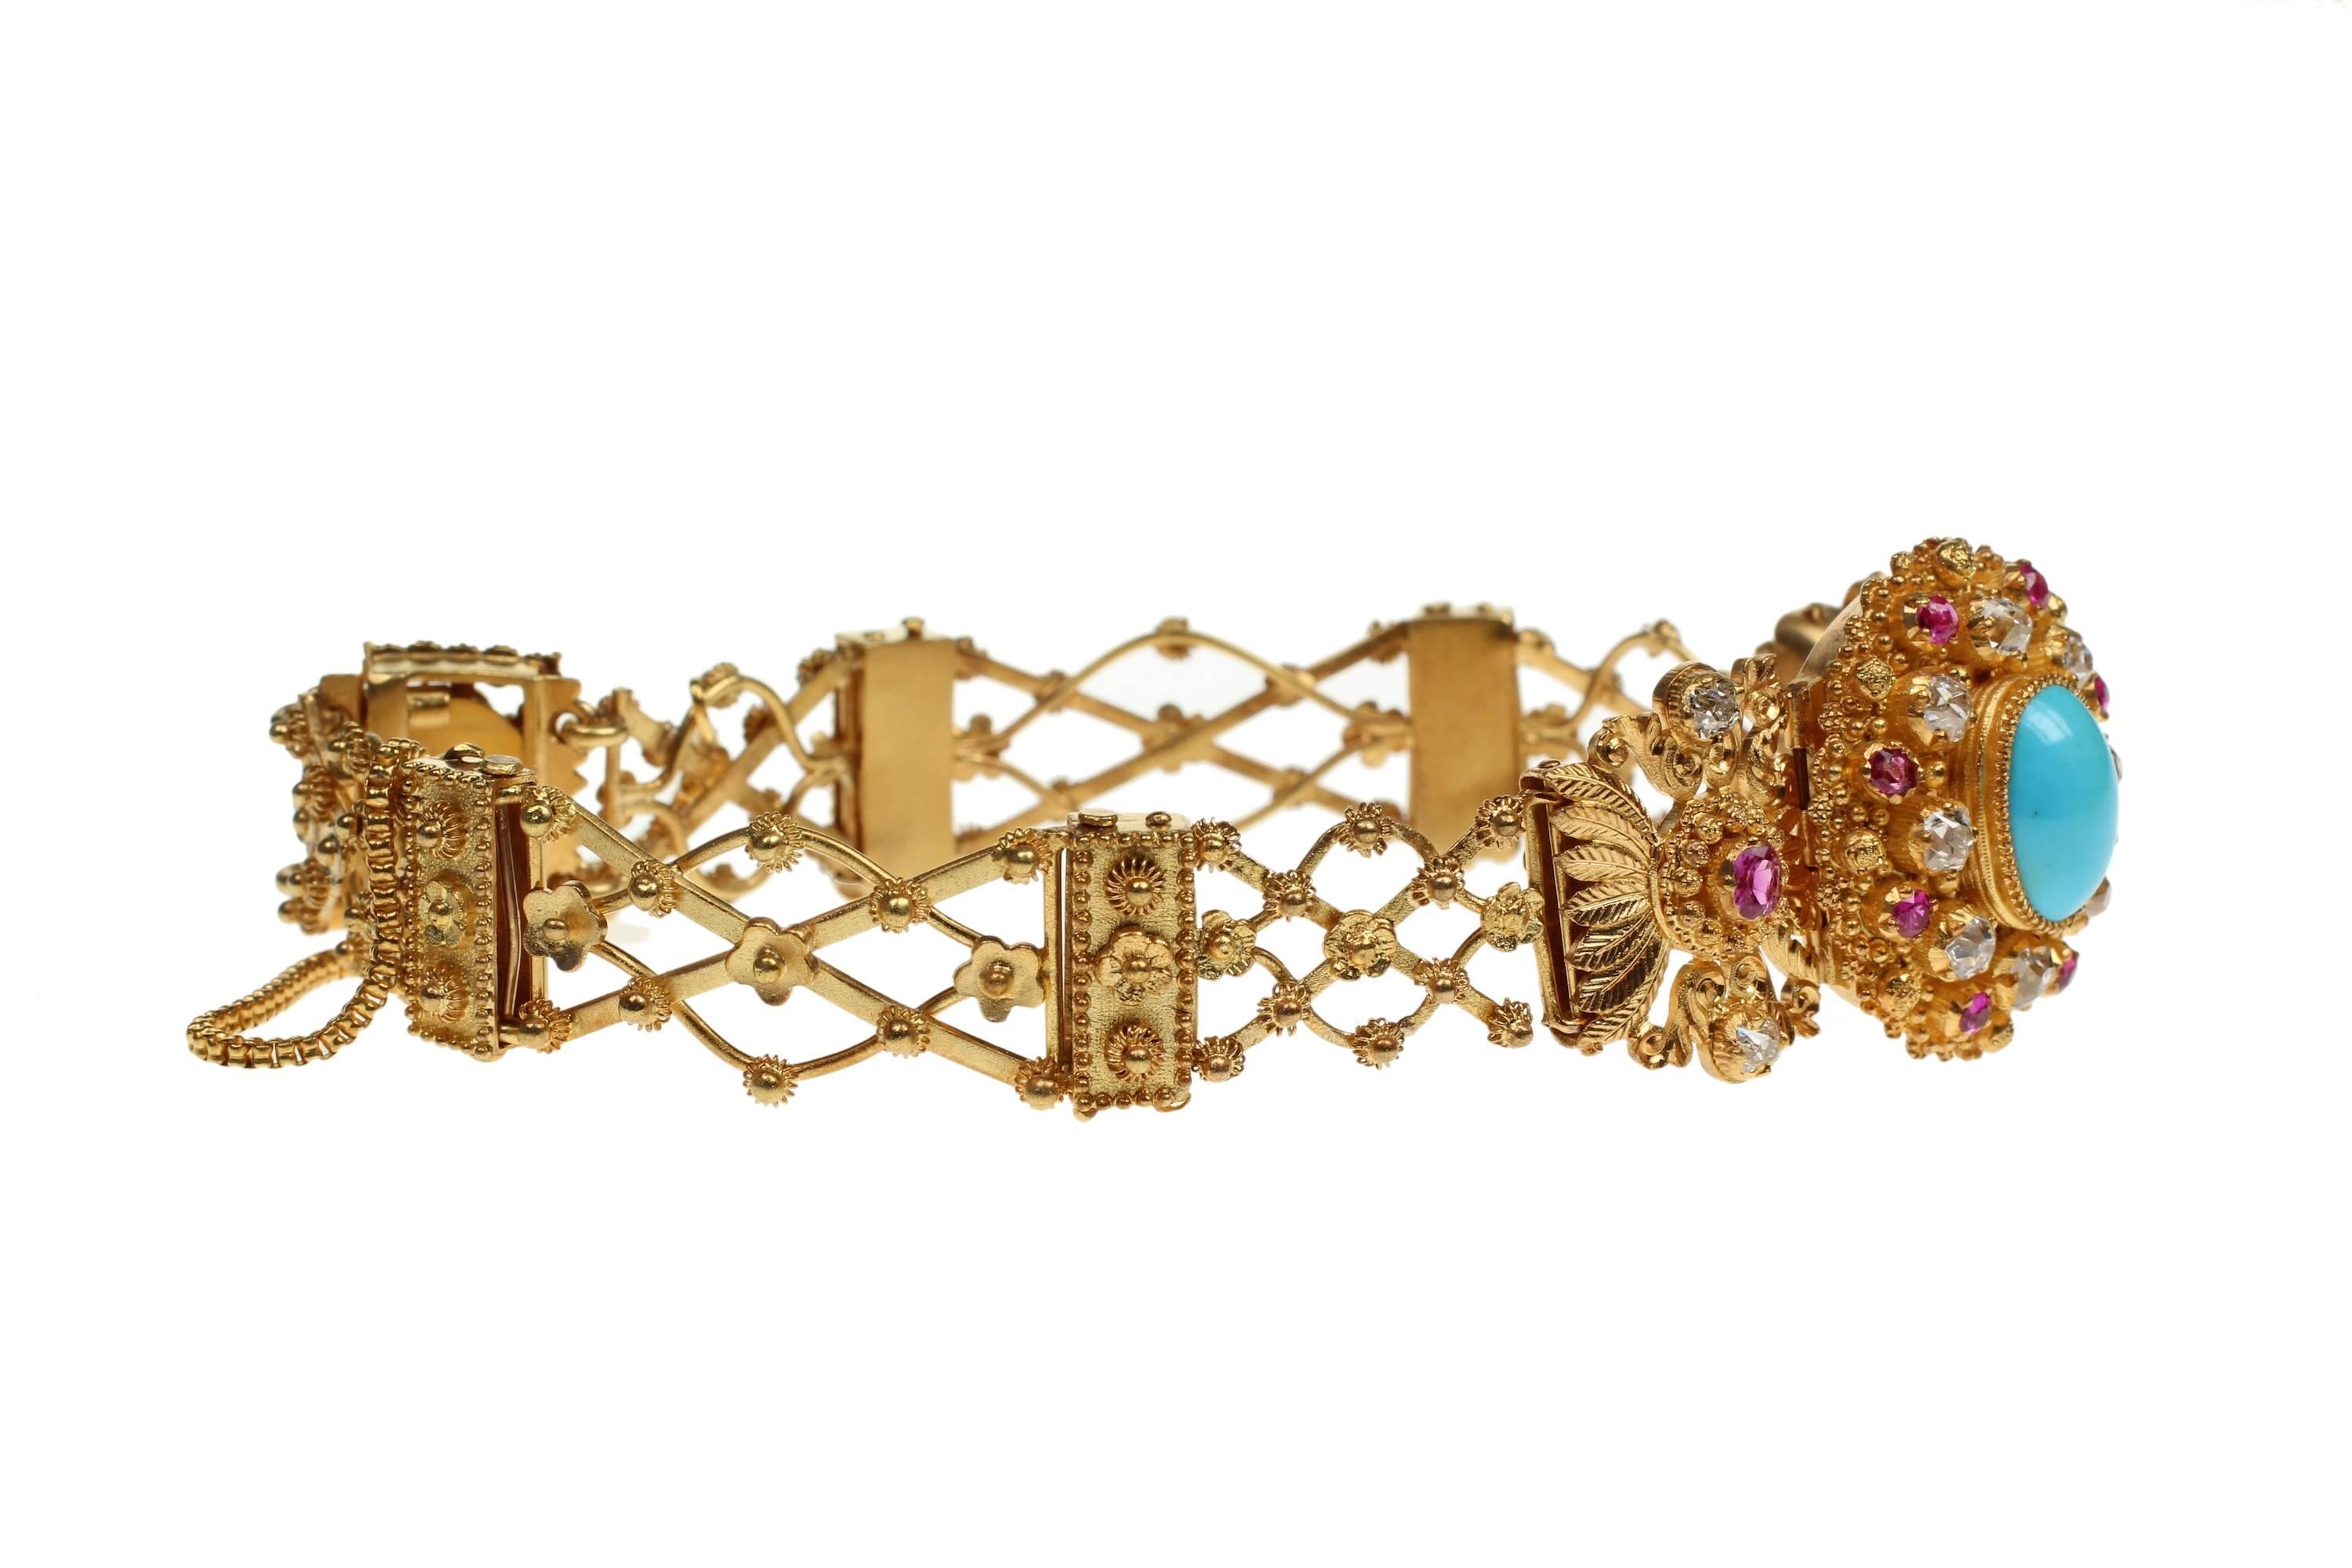 Victorian 18ct gold, diamond, ruby, turquoise bracelet with Etruscan style ornamentation. 
Main centeripiece is approx 0.8 inches by 0.7 inches and bangle circumference is approx 7 inches. inside daimeter is approx 2.5 inches
Excellent condition.